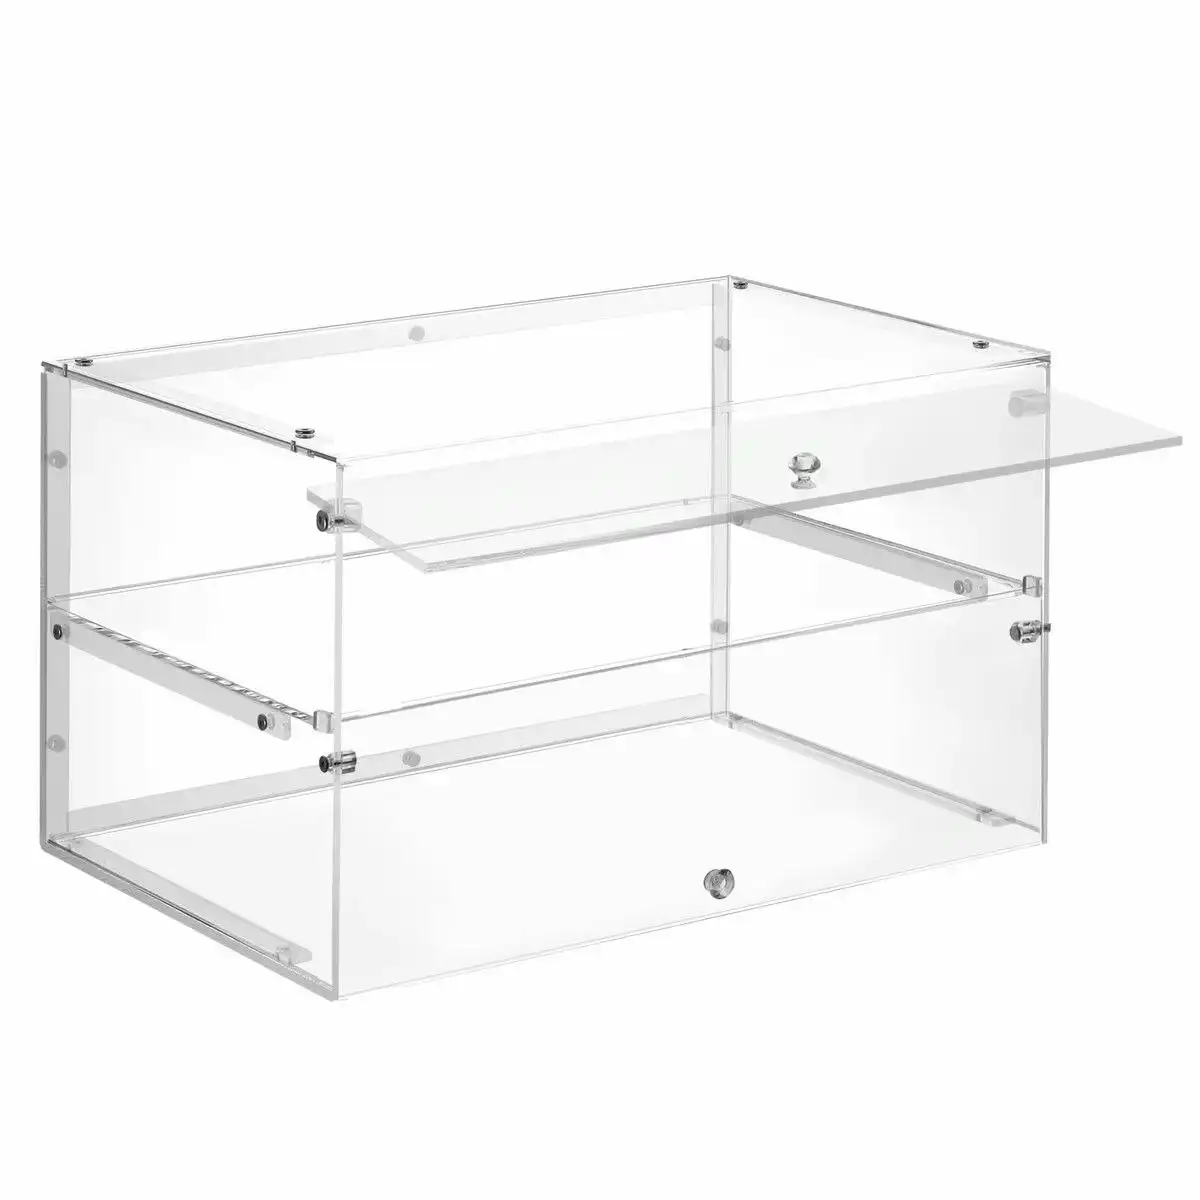 LUXSUITE Cake Cabinet Display Cupcake Shelf 2 Tier Unit Acrylic Bakery Case Stand Muffin Donut Pastry Model Toy Showcase Countertop Flip-up Door 5mm